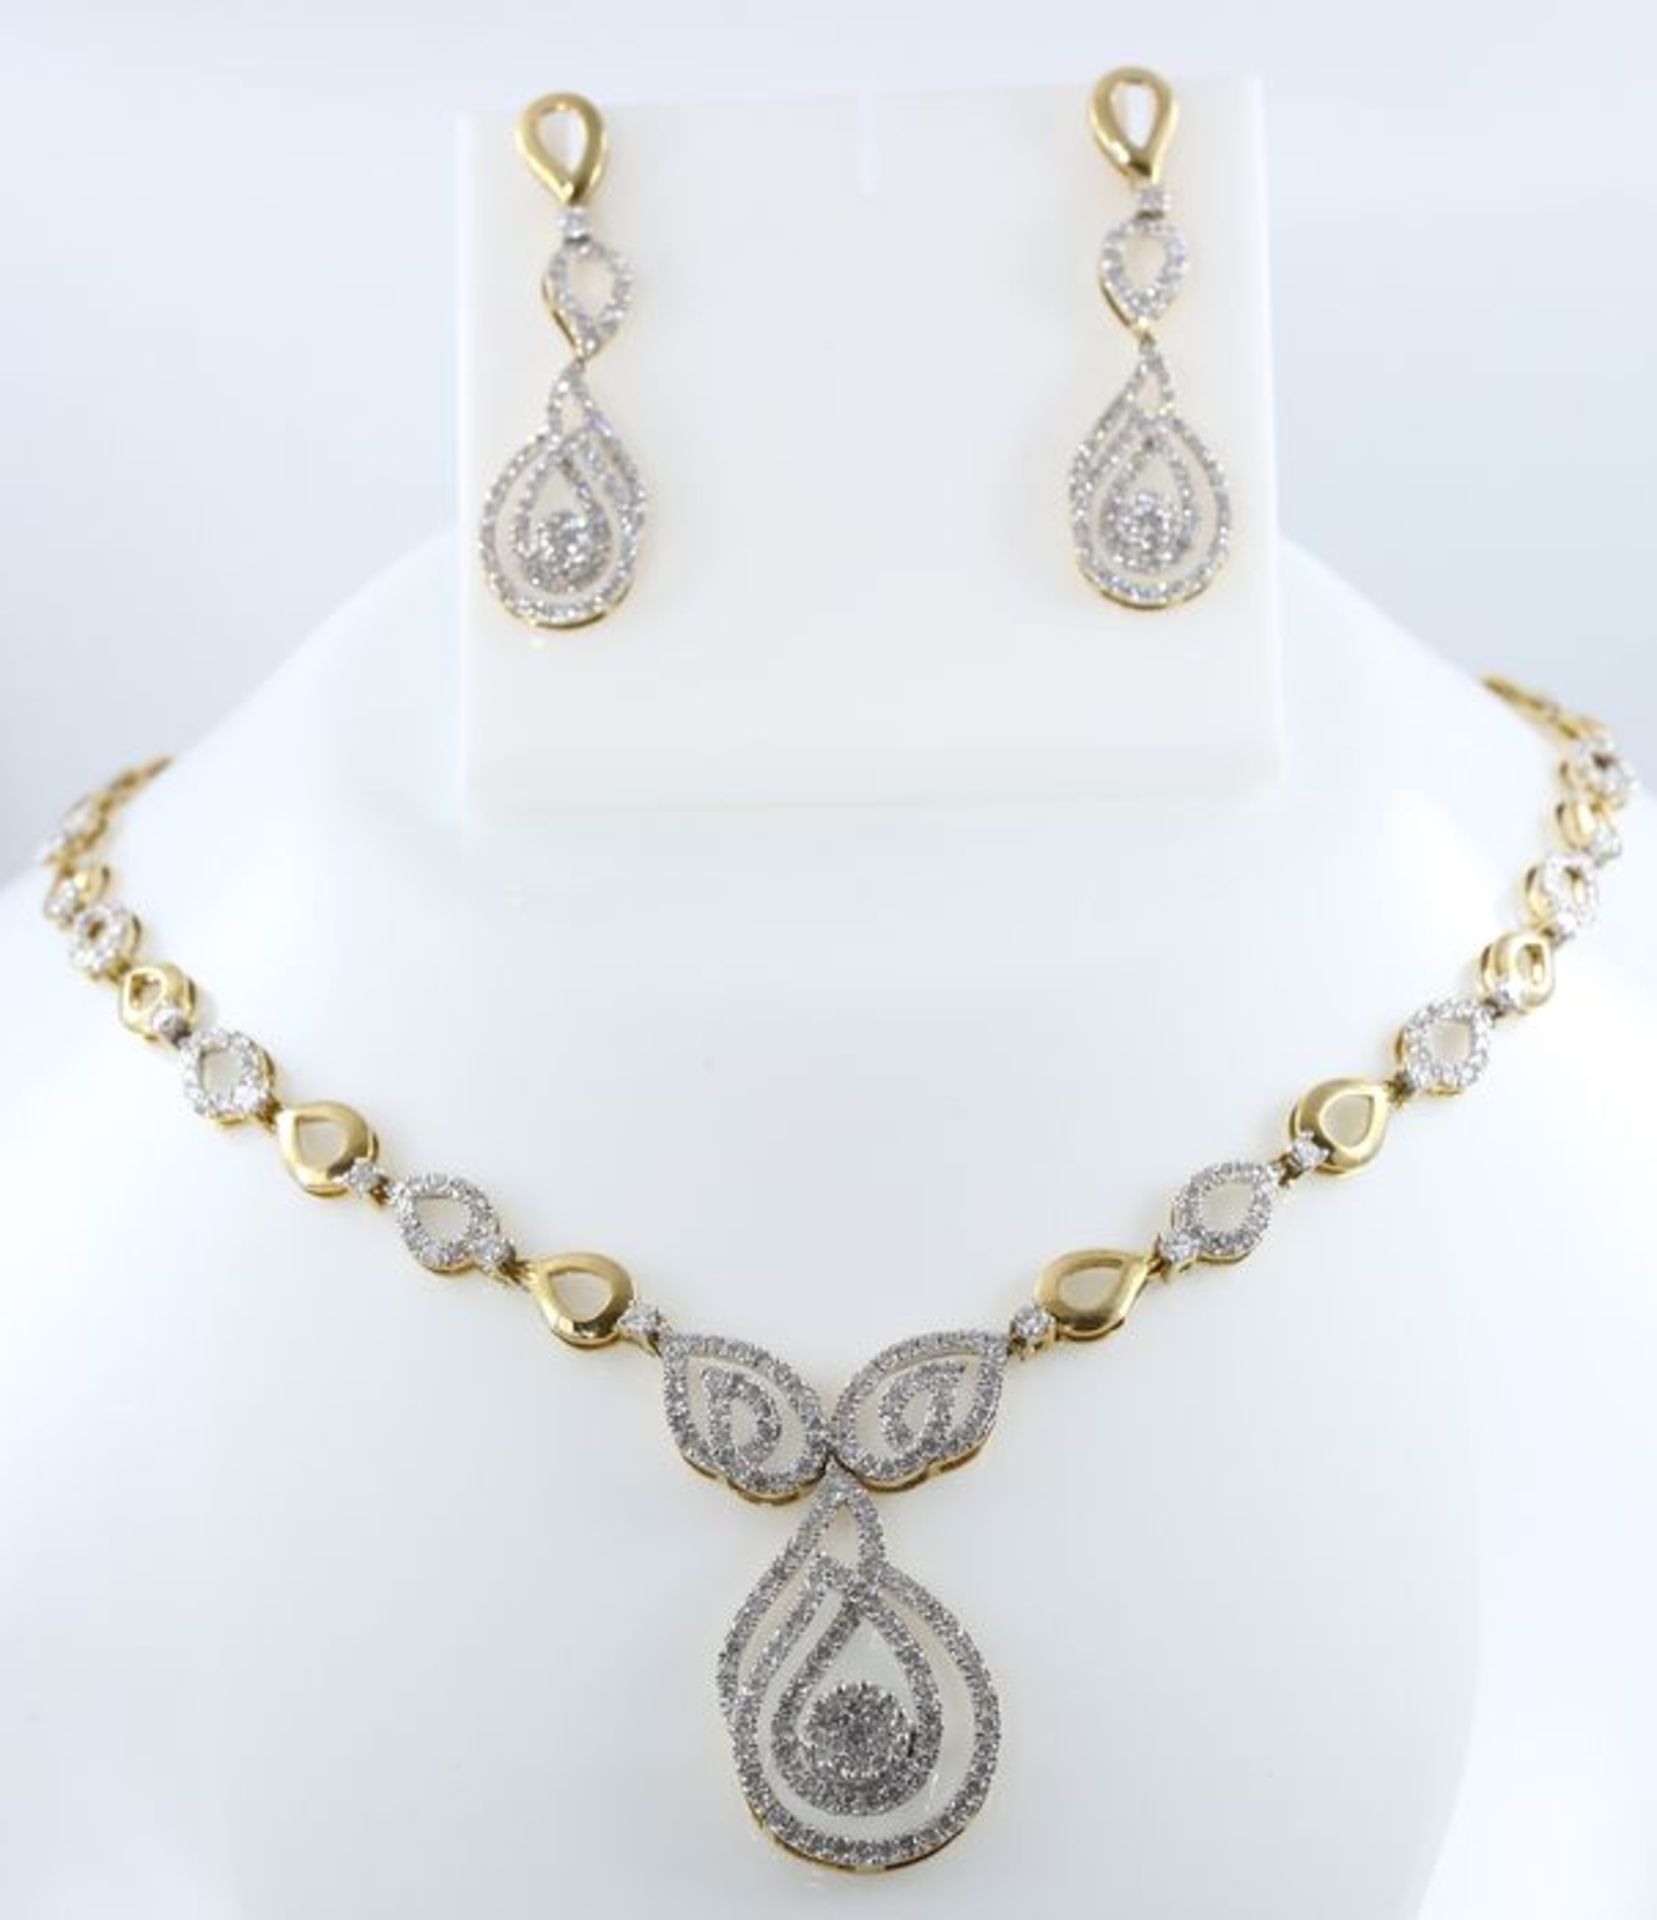 IGI Certified 14 K / 585 Yellow Gold Diamond Necklace with matching Earrings - Image 5 of 9